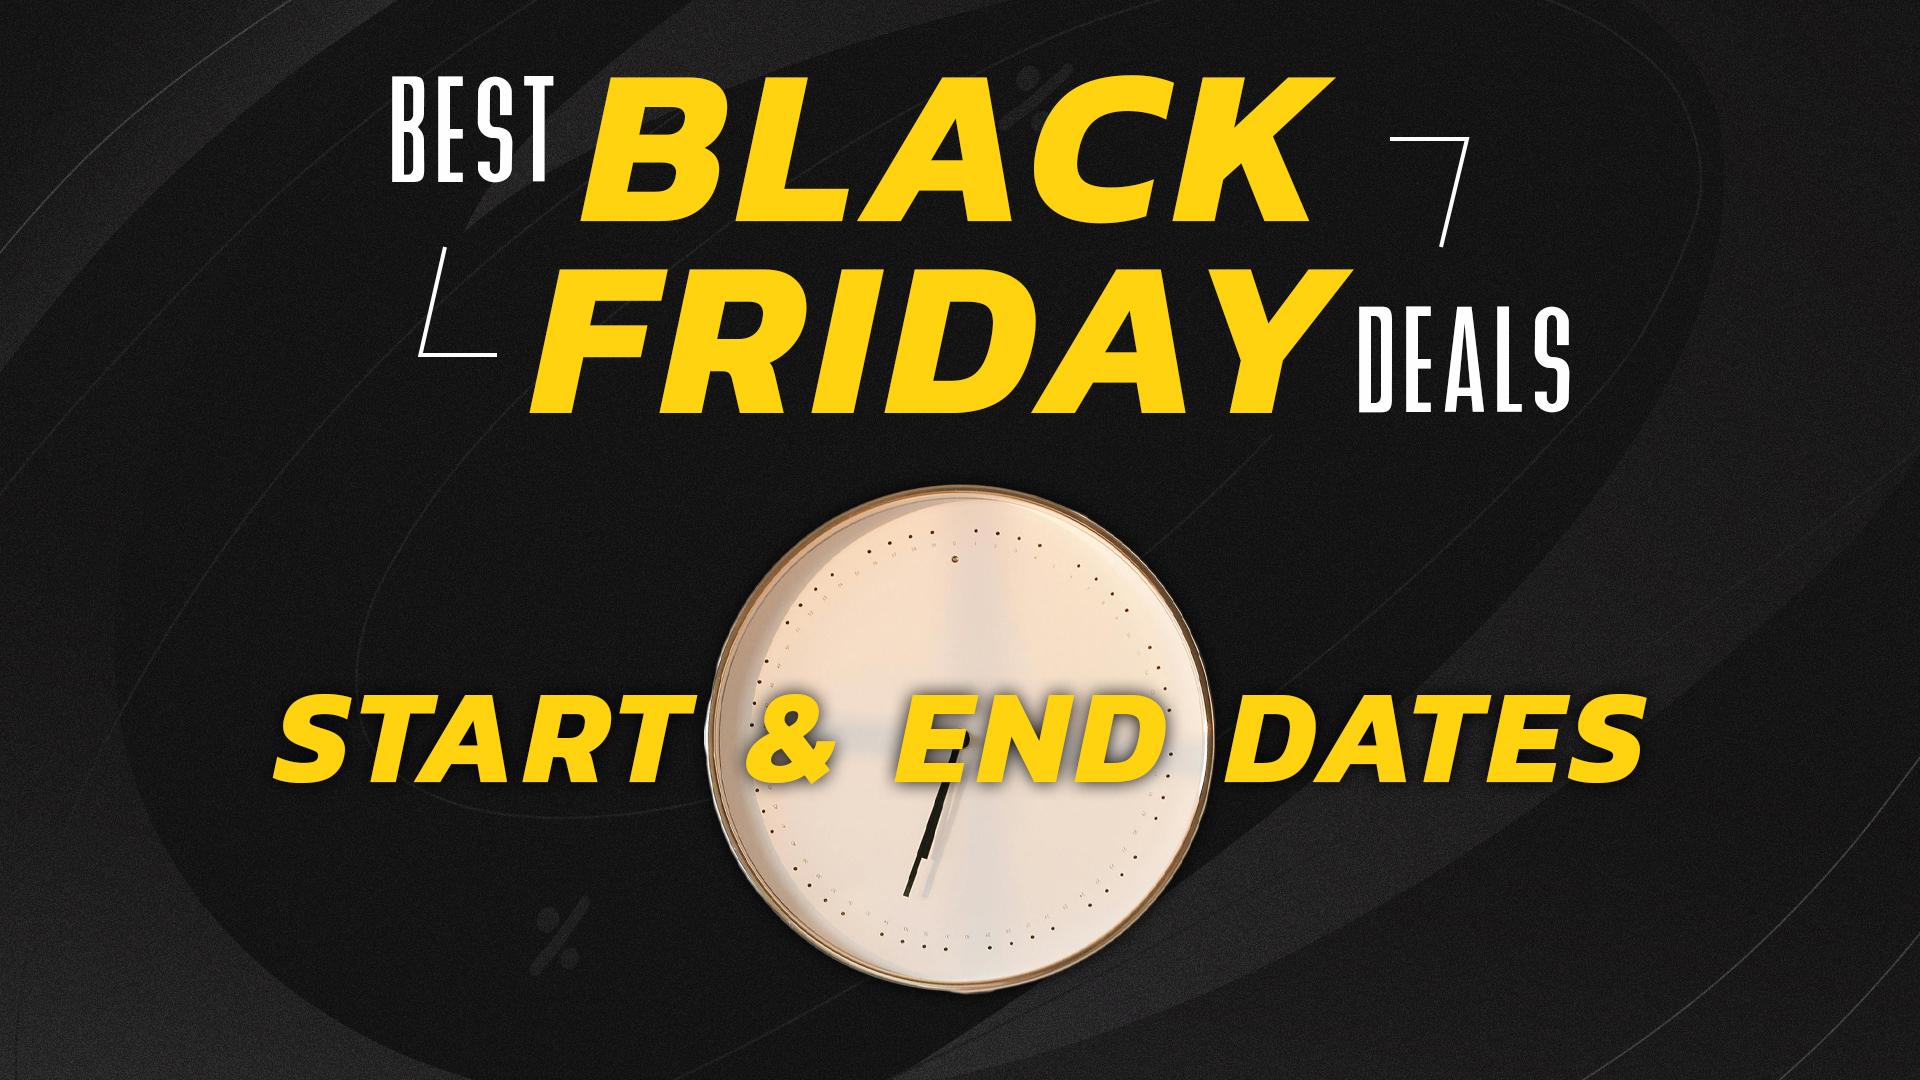 All Black Friday store sale dates Walmart, Best Buy, Costco & more